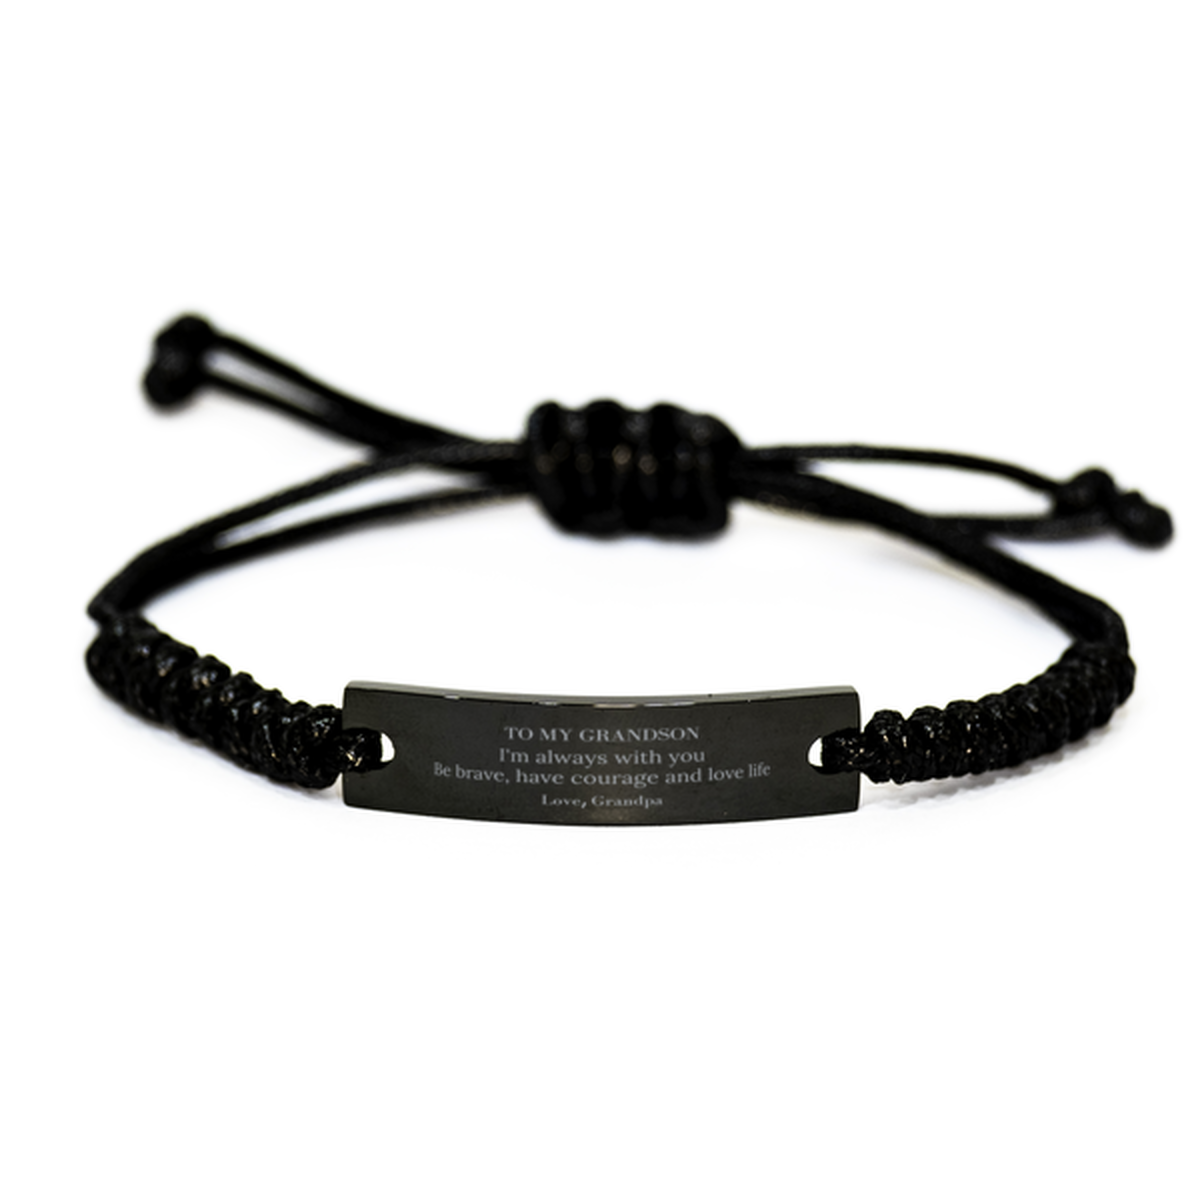 To My Grandson Gifts from Grandpa, Unique Black Rope Bracelet Inspirational Christmas Birthday Graduation Gifts for Grandson I'm always with you. Be brave, have courage and love life. Love, Grandpa